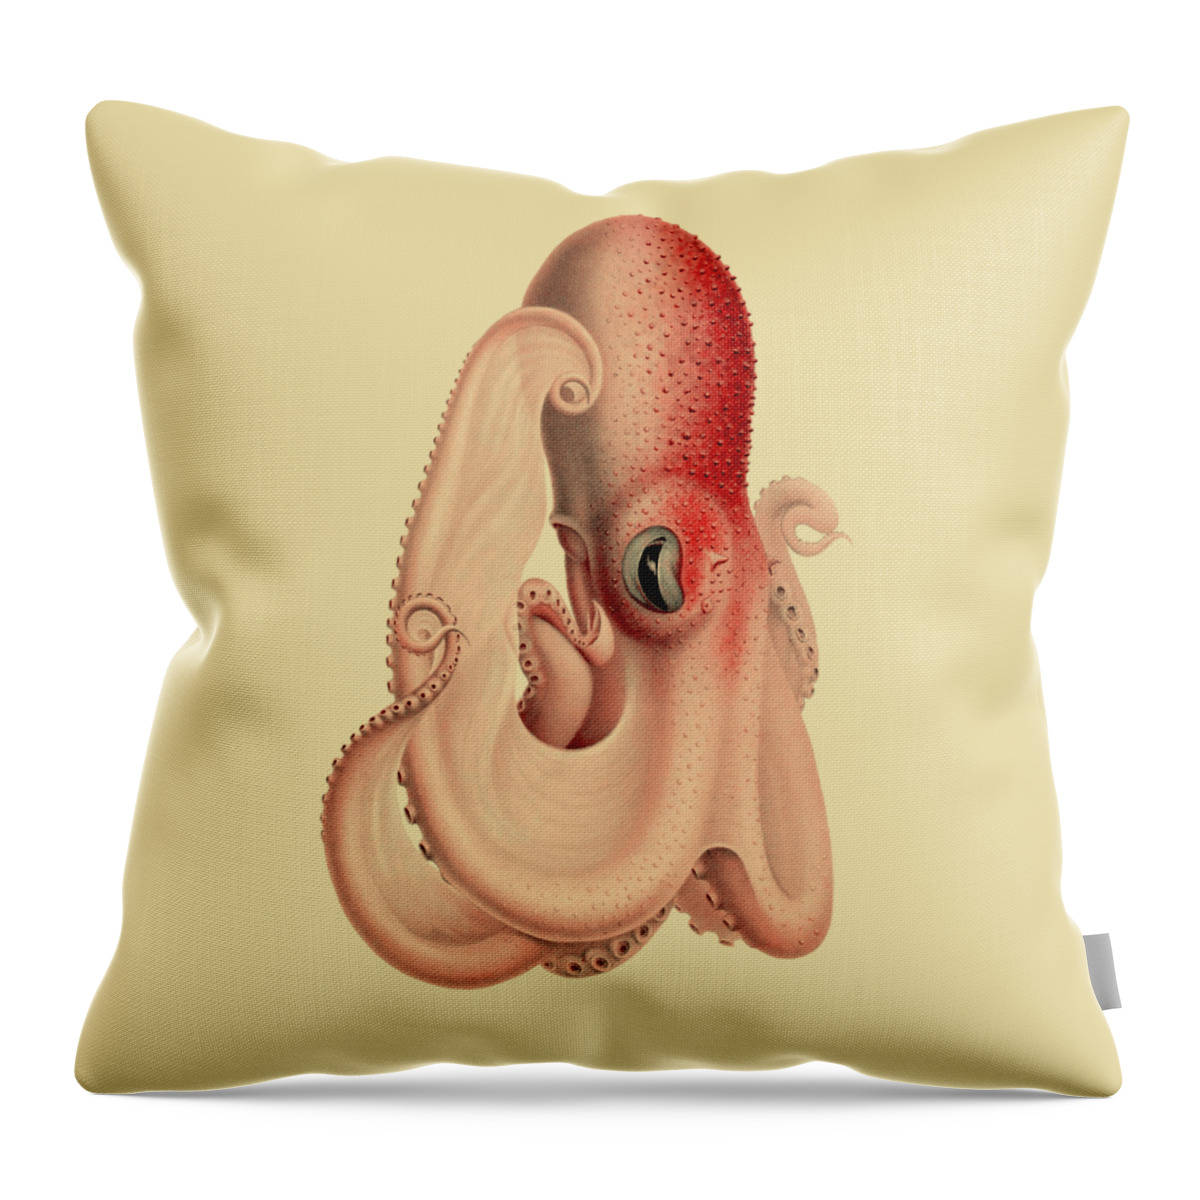 Octopus Throw Pillow featuring the digital art Pink Octopus by Madame Memento